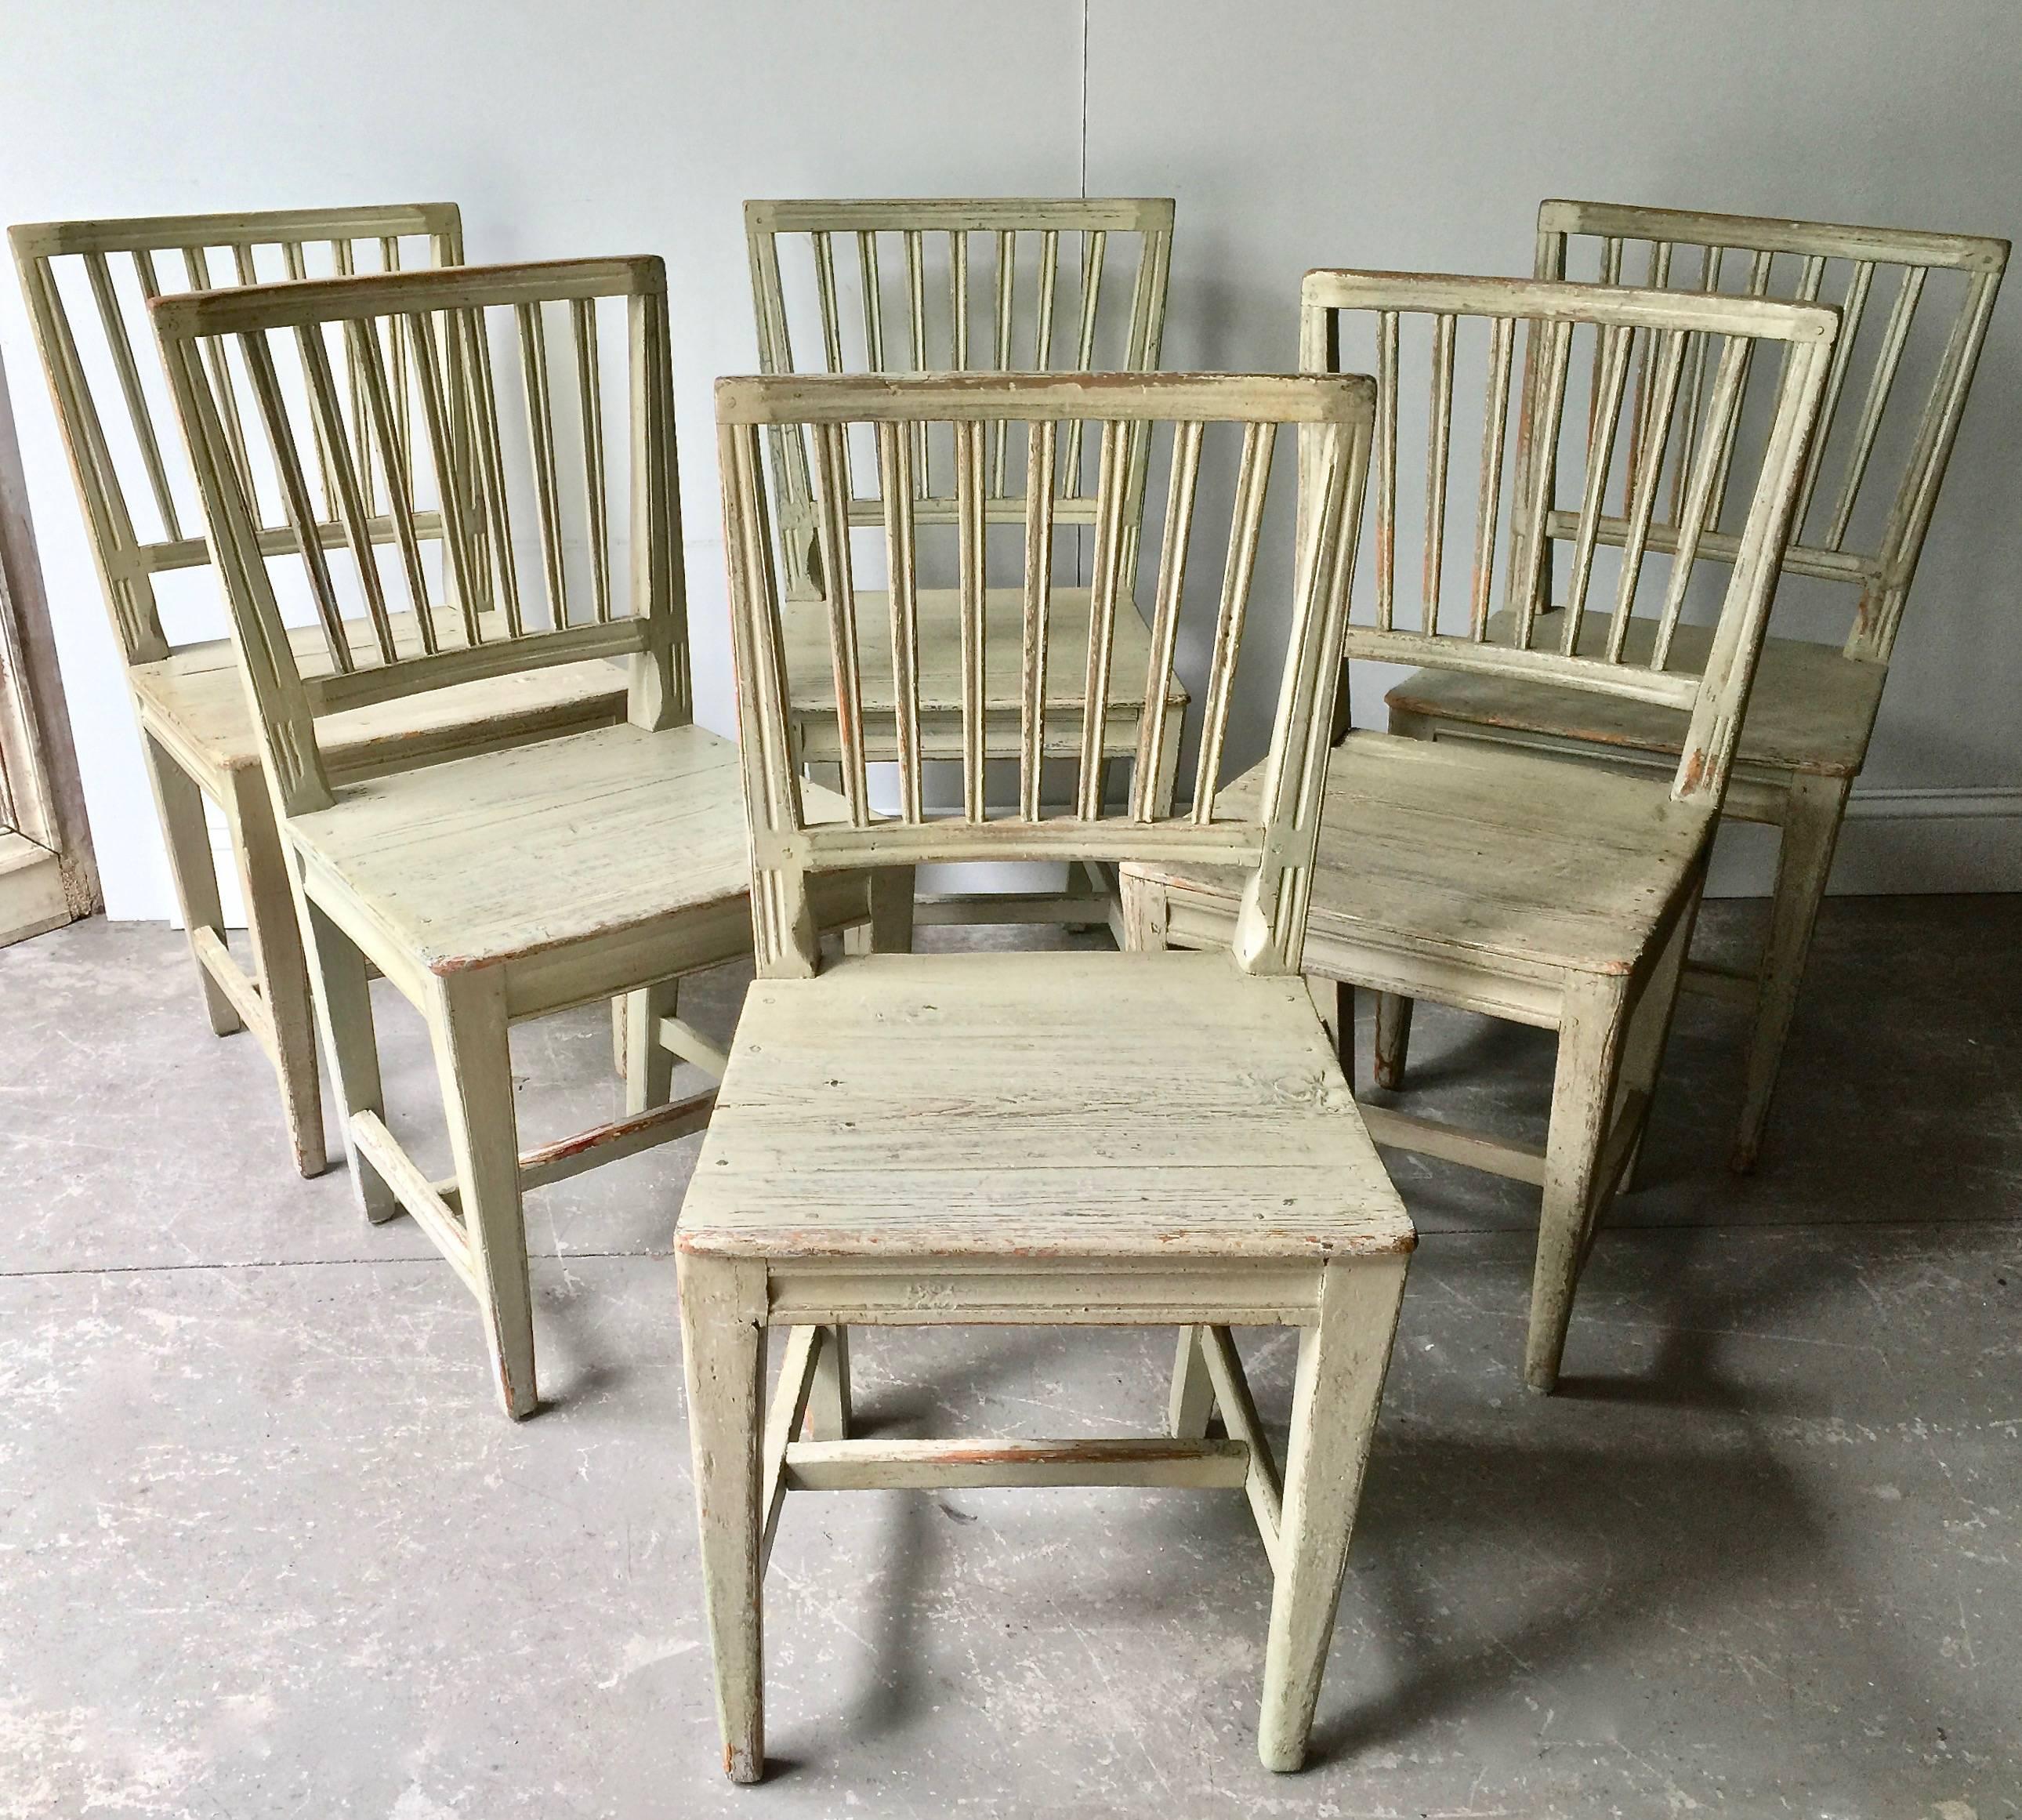 A charming set of six of Swedish 19th century painted Primitive side chairs with simple baluster backs, shaped aprons and straight legs with H-stretchers in time worn greenish patina with traches of bluish paint,
Sweden, 19th century.
Surprising